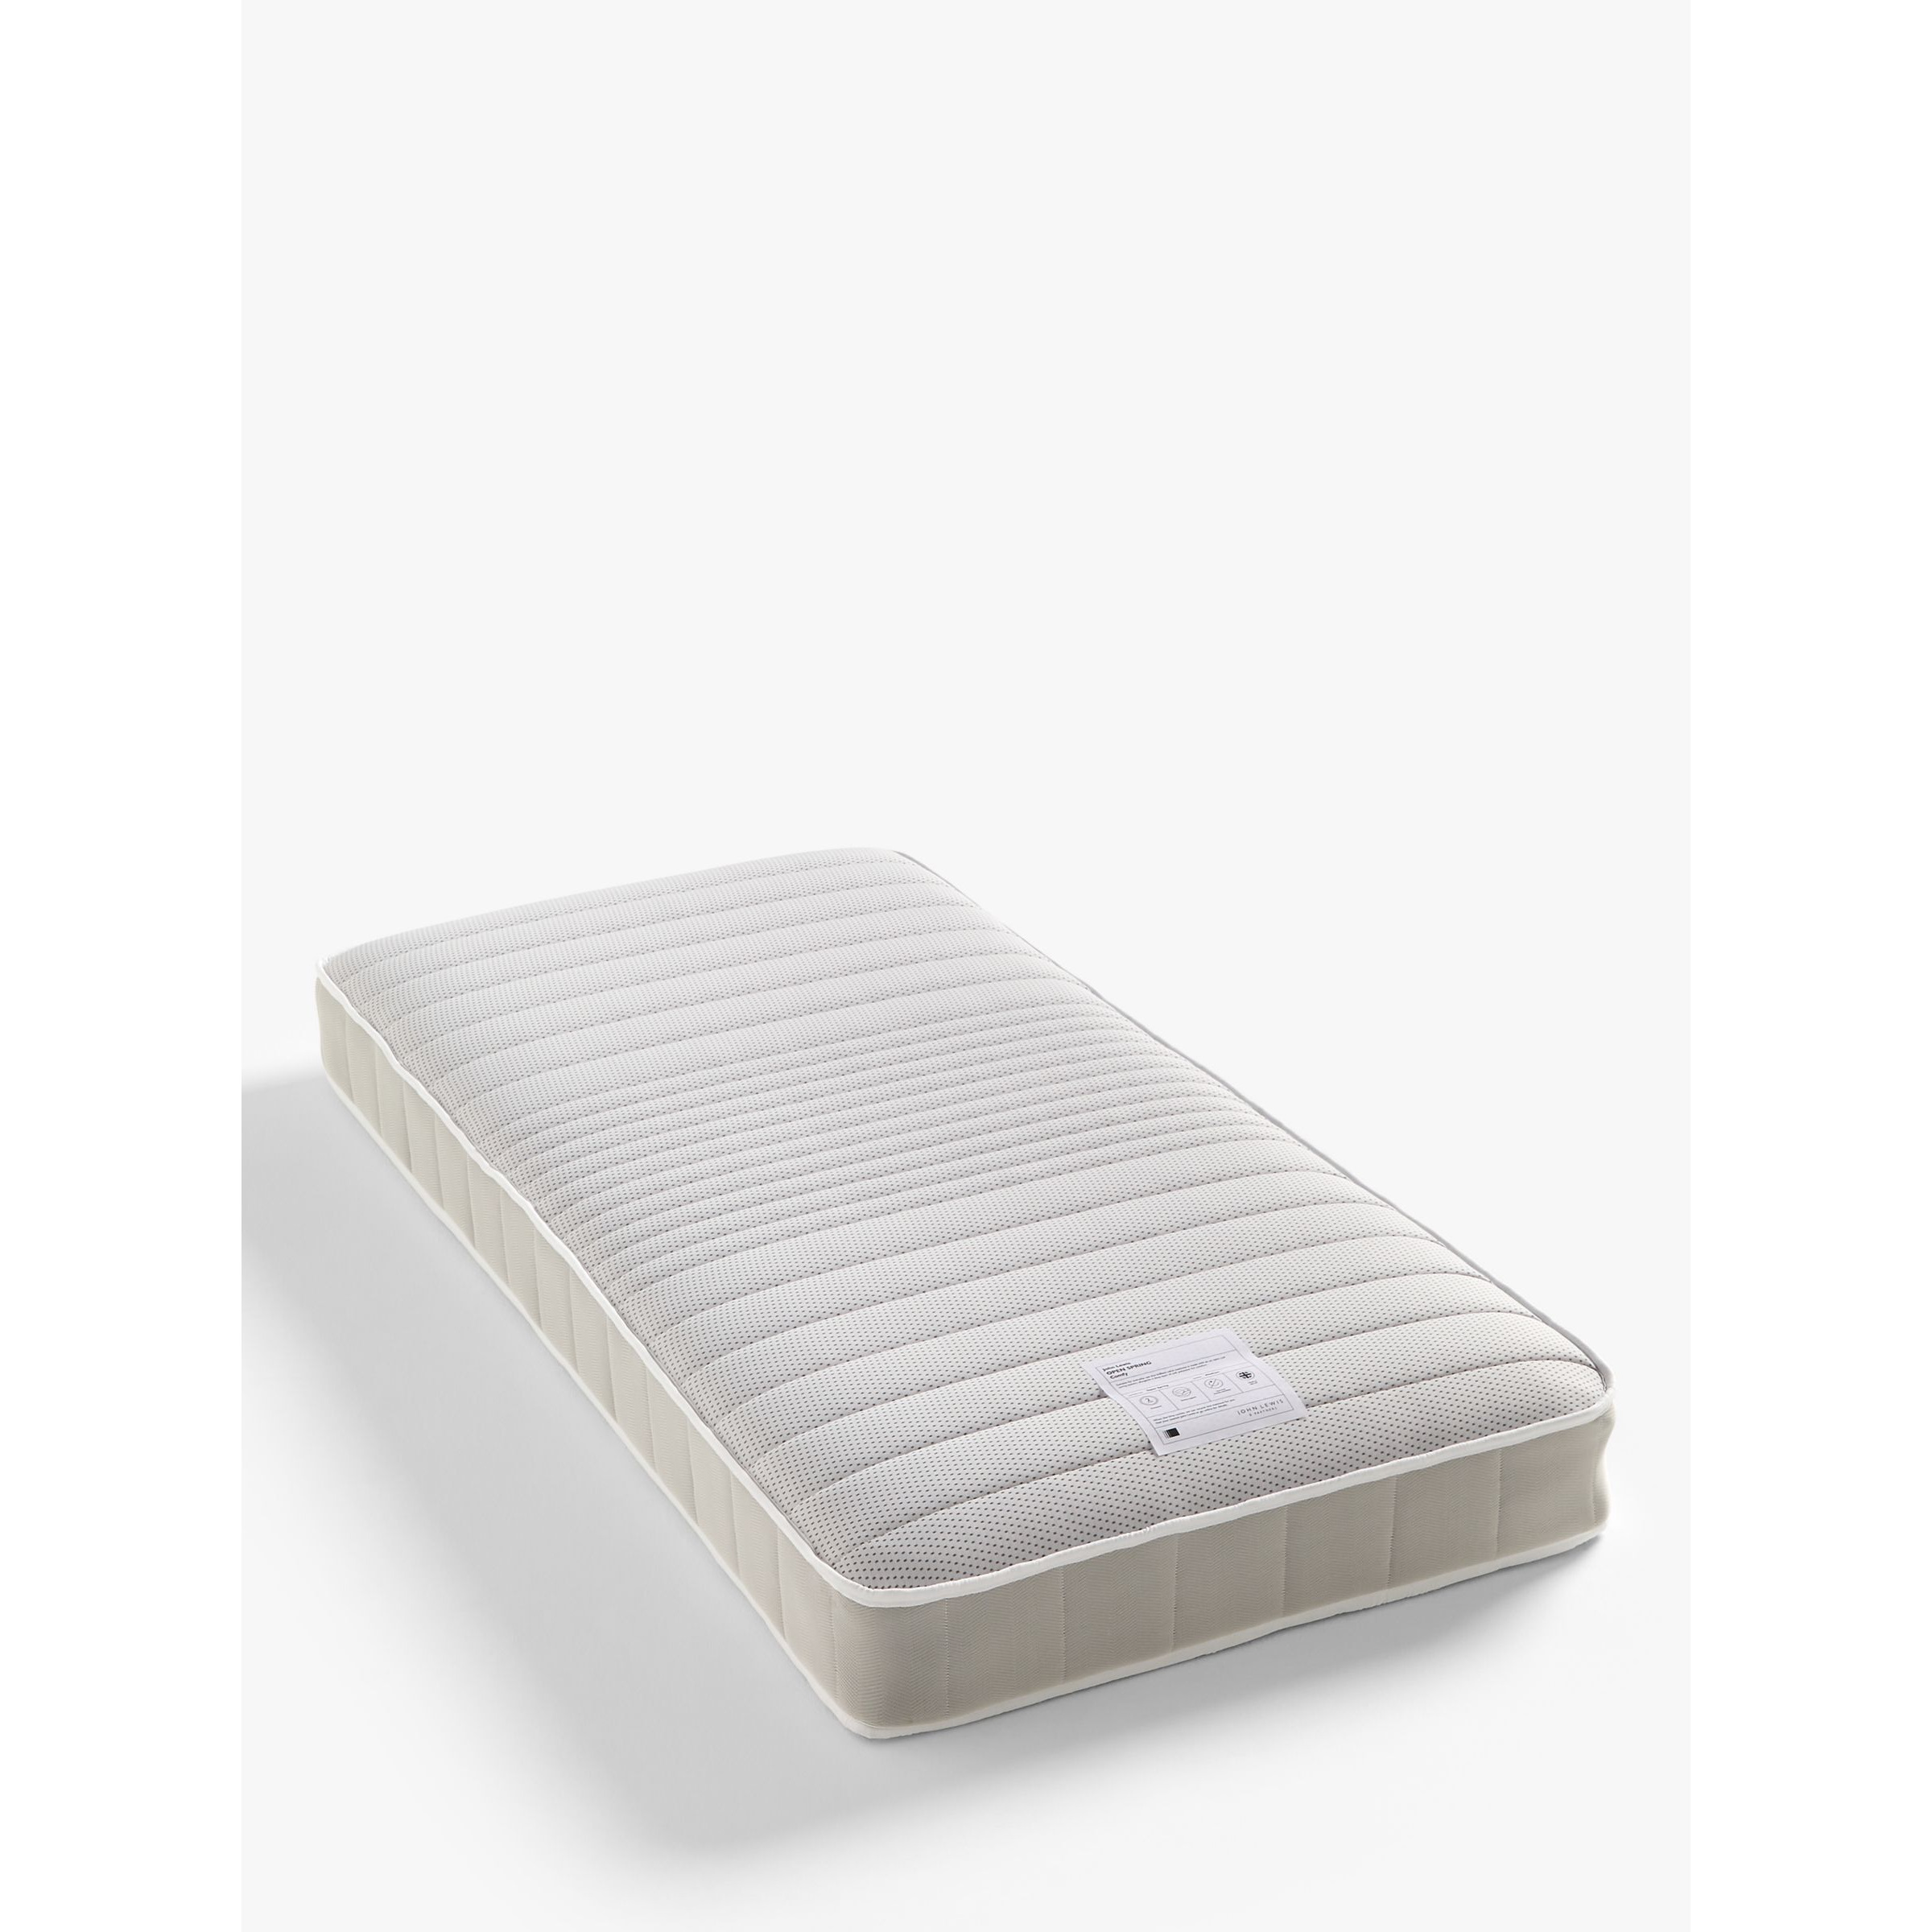 John Lewis Open Spring Comfy Mattress, Regular Tension, Small Double - image 1